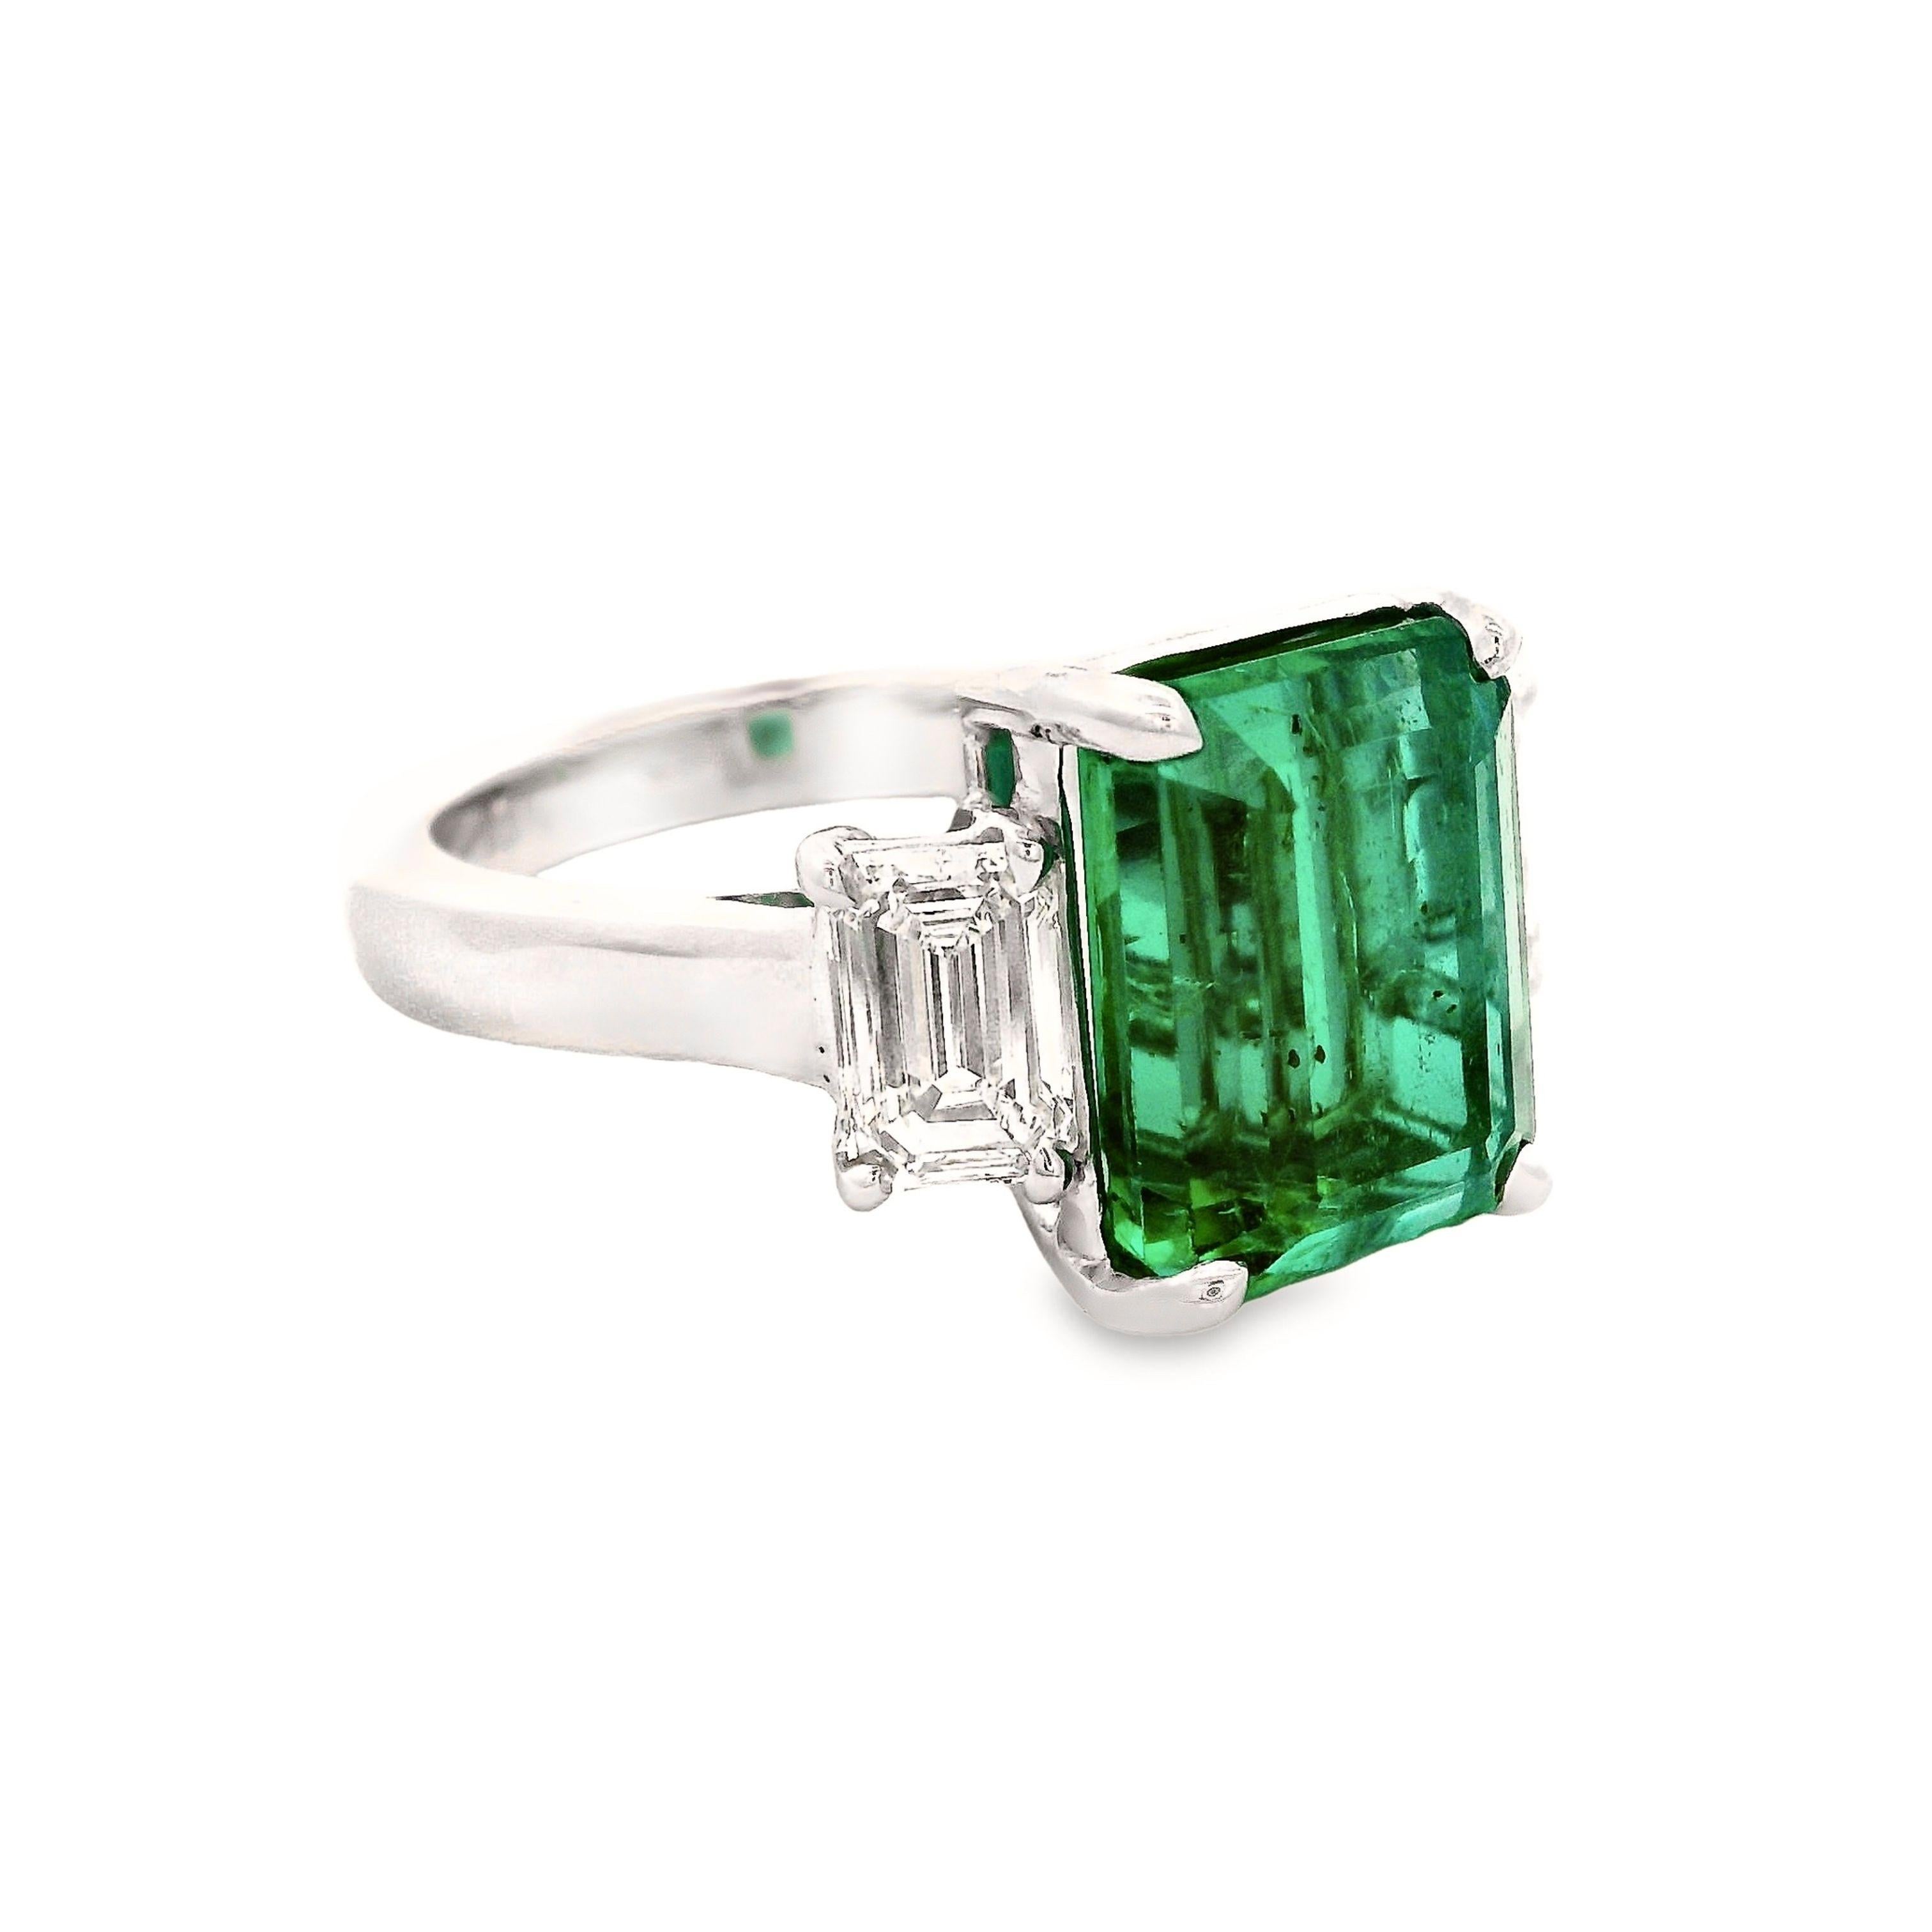 Emerald Cut Alexander Beverly Hills All GIA 5.74ctt Emerald & G IF Diamond 3-Stone Ring 18k For Sale